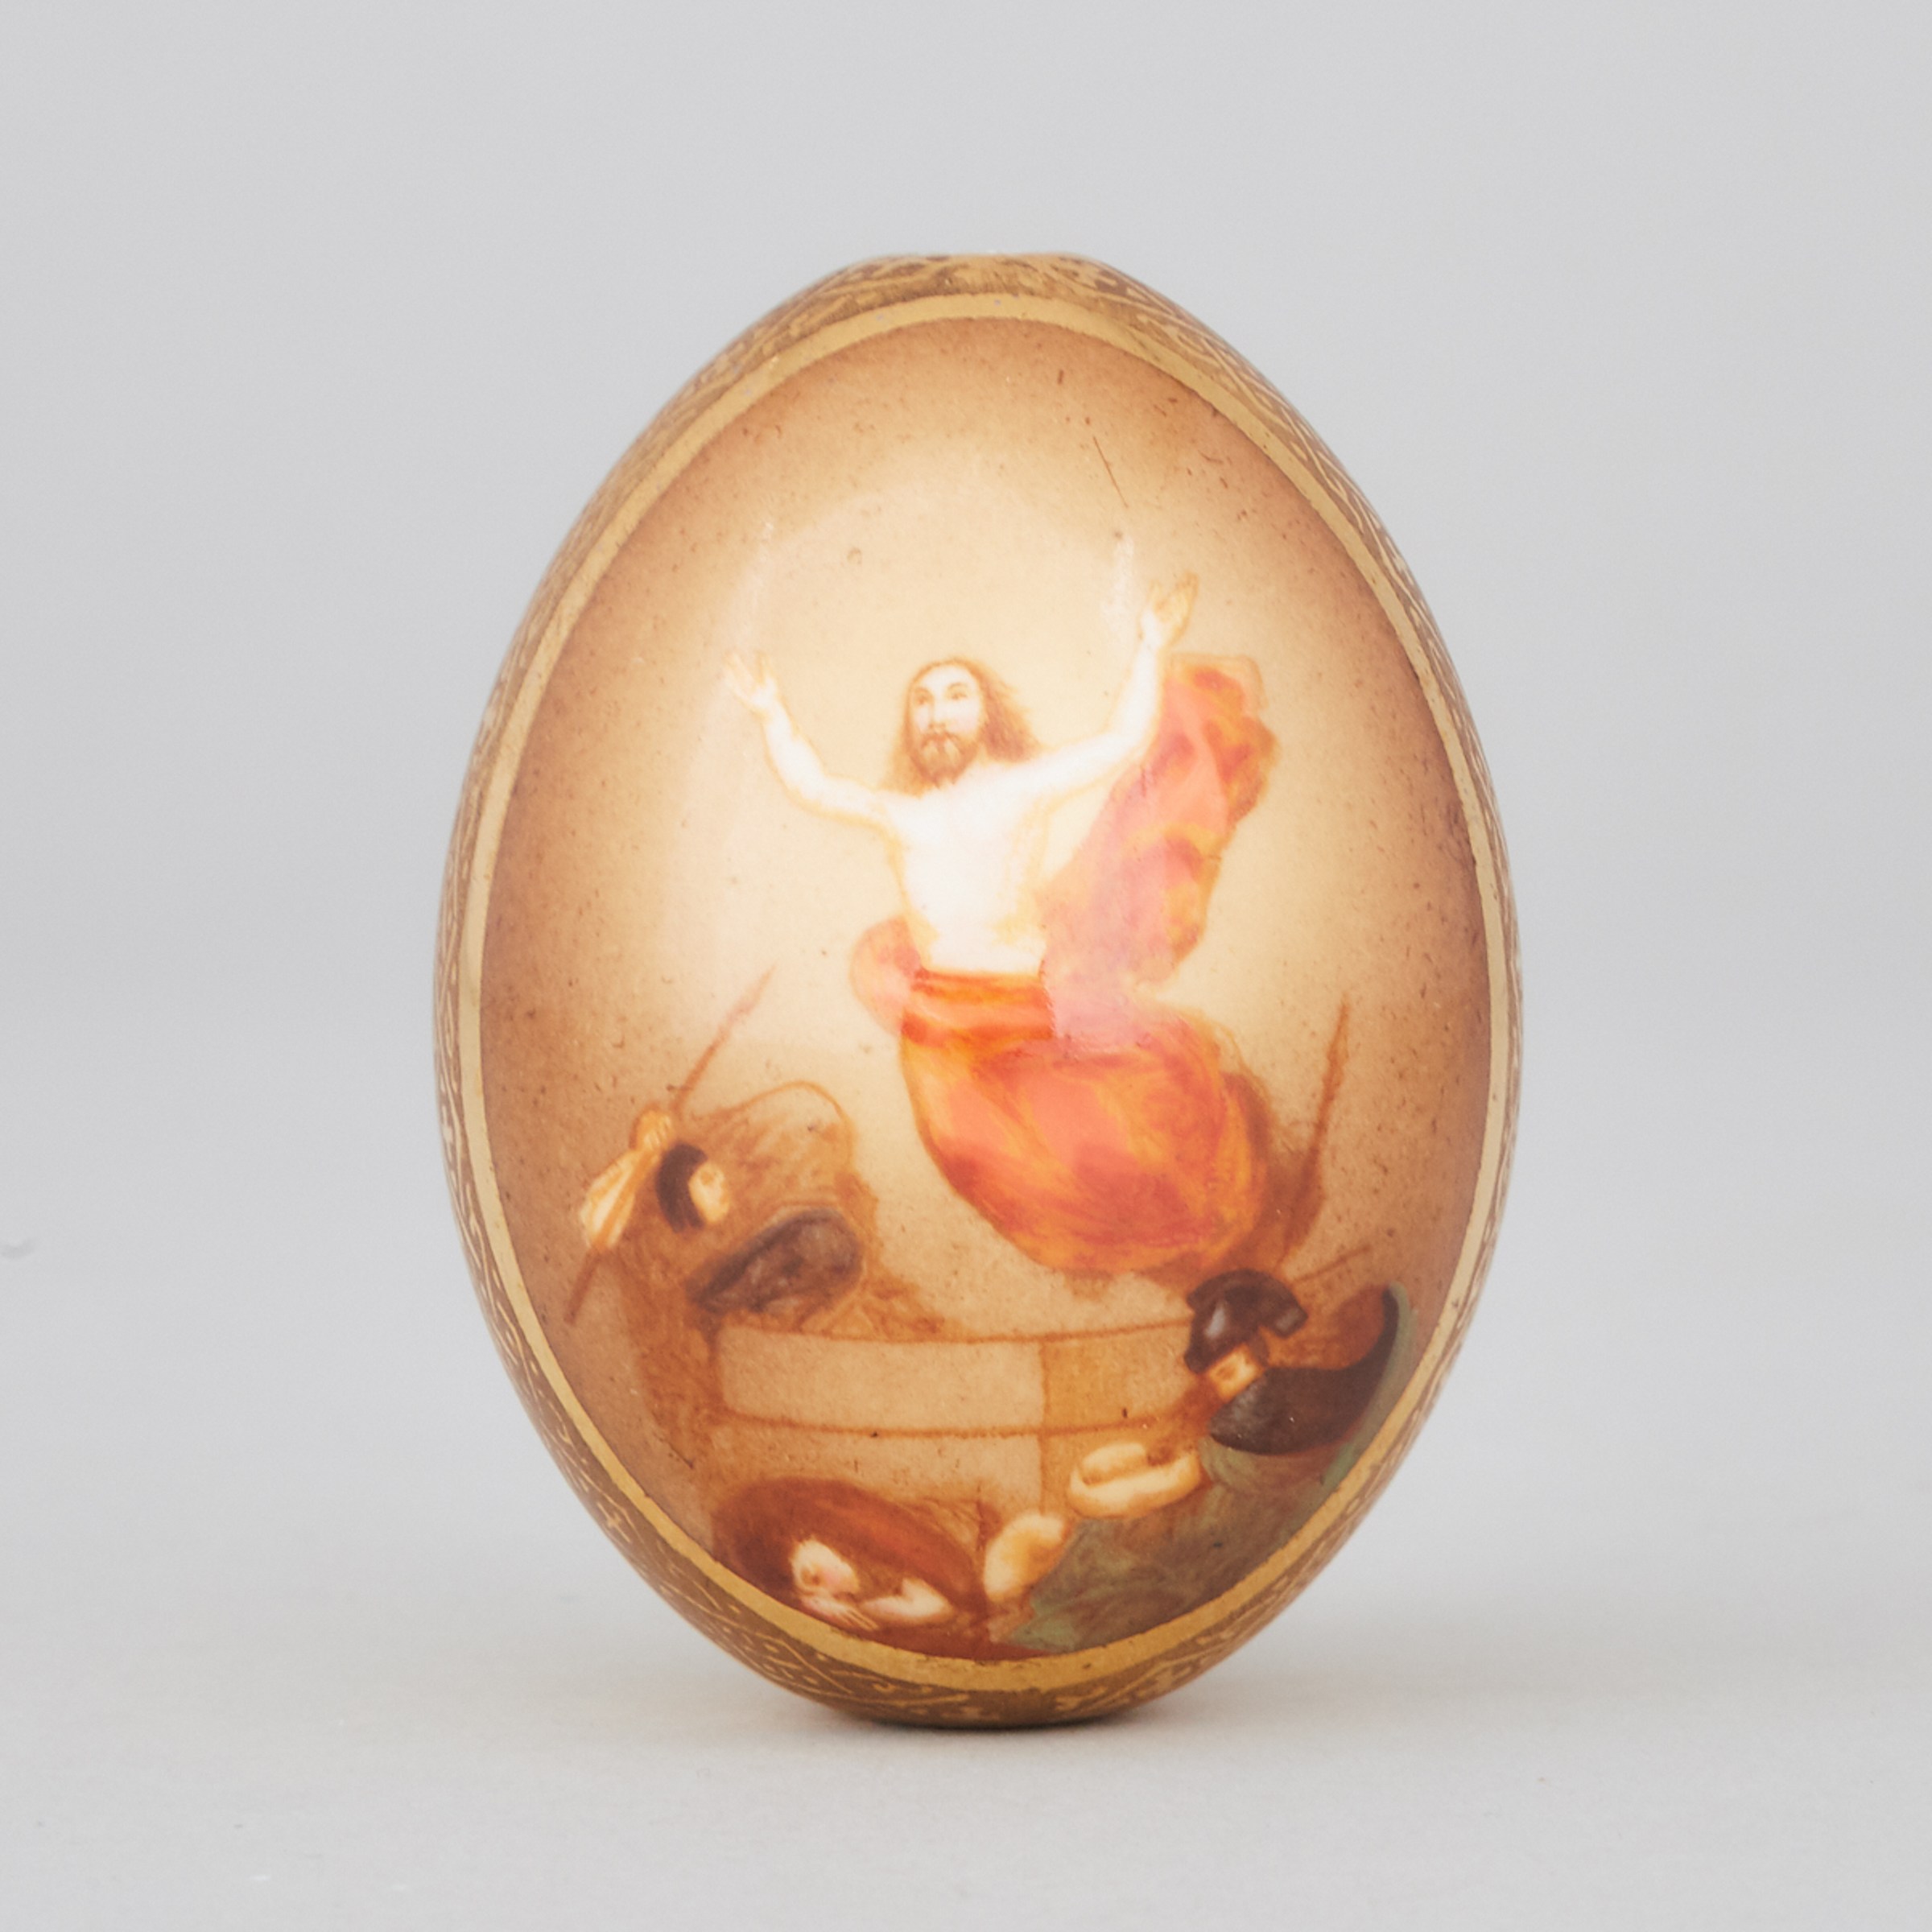 Russian Porcelain Easter Egg, possibly Imperial Porcelain Manufactory, late 19th century